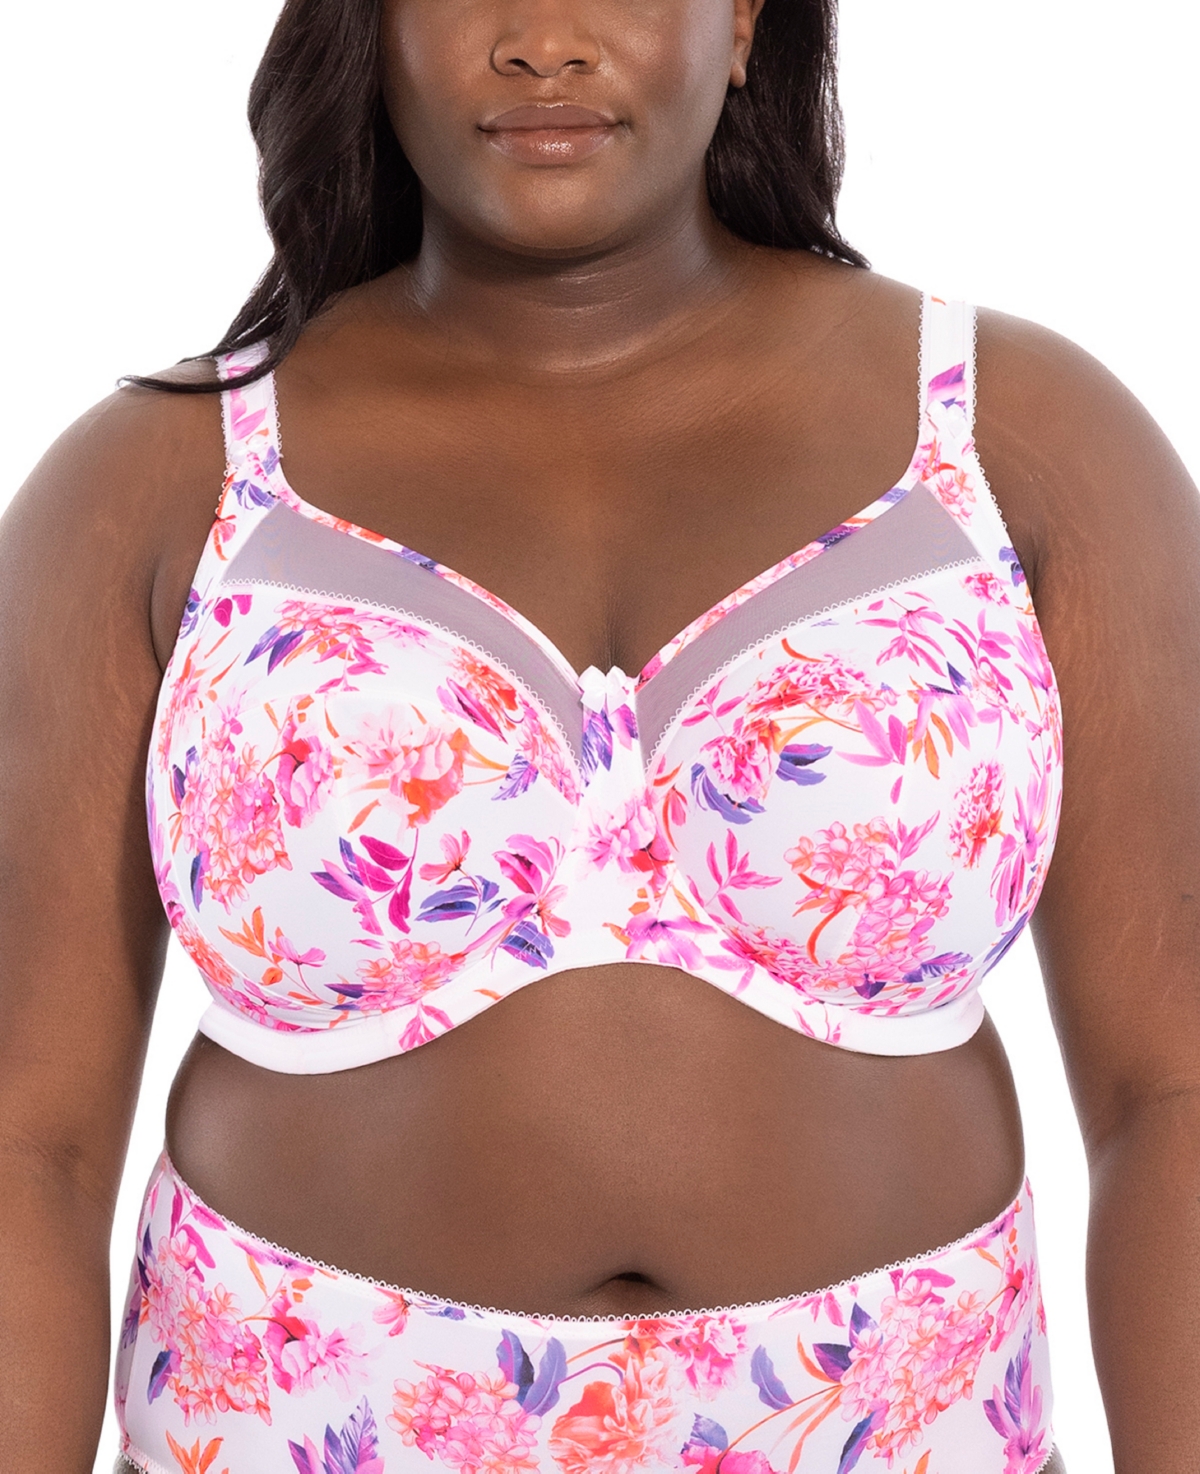 Goddess Plus Size Kayla Underwire Banded Bra, Gd6162 In Summer Bloom